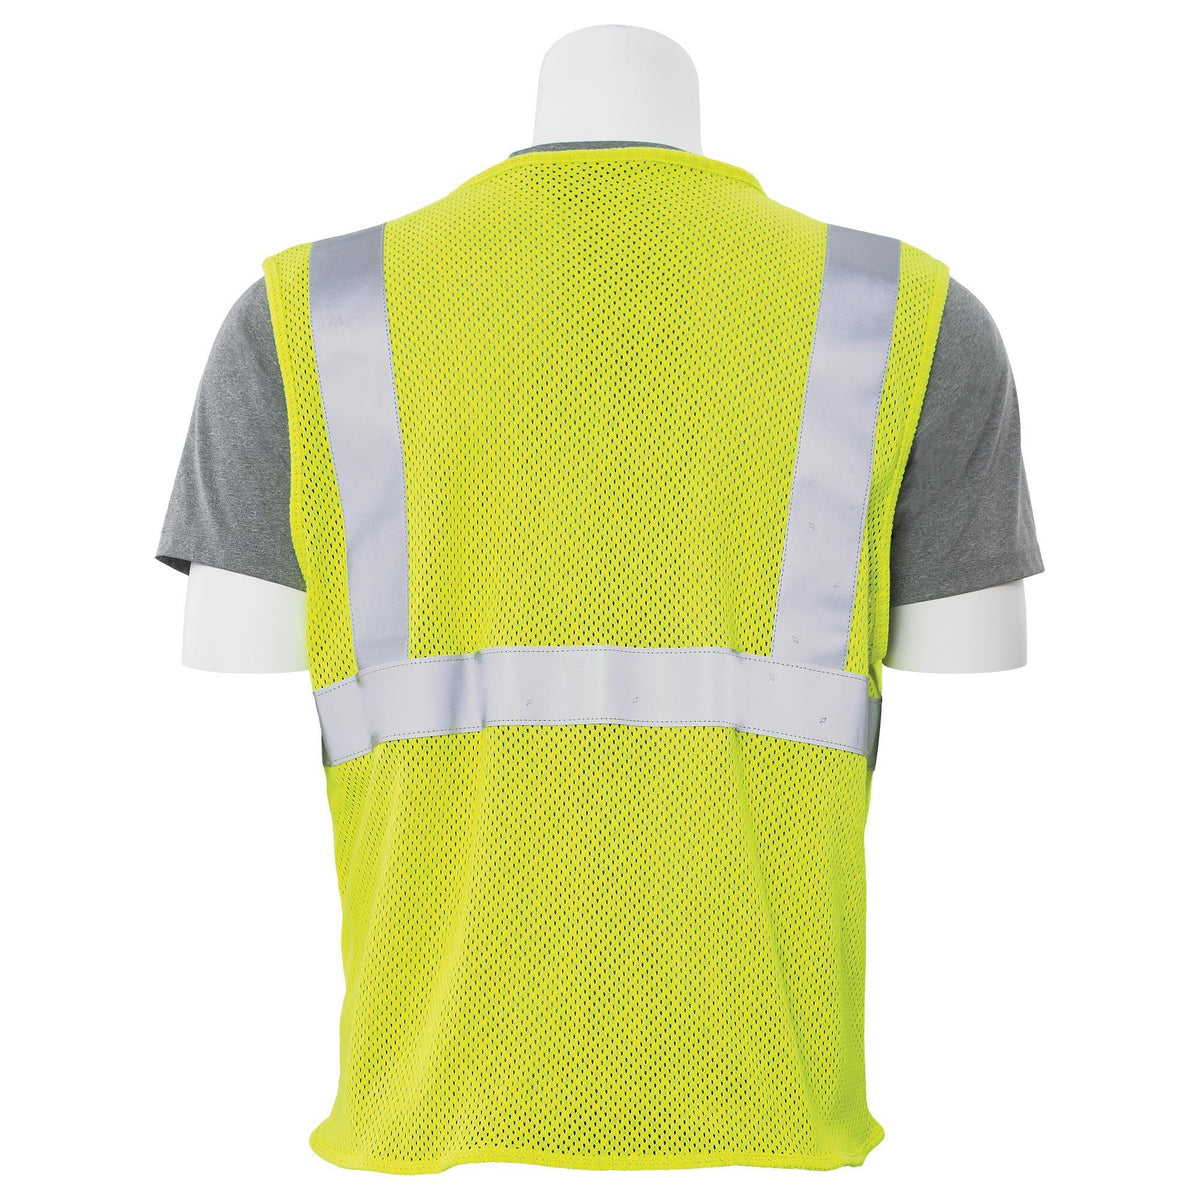 IFR153 Class 2 Inherently Flame Resistant Anti-Static Mesh Safety Vest 1pc